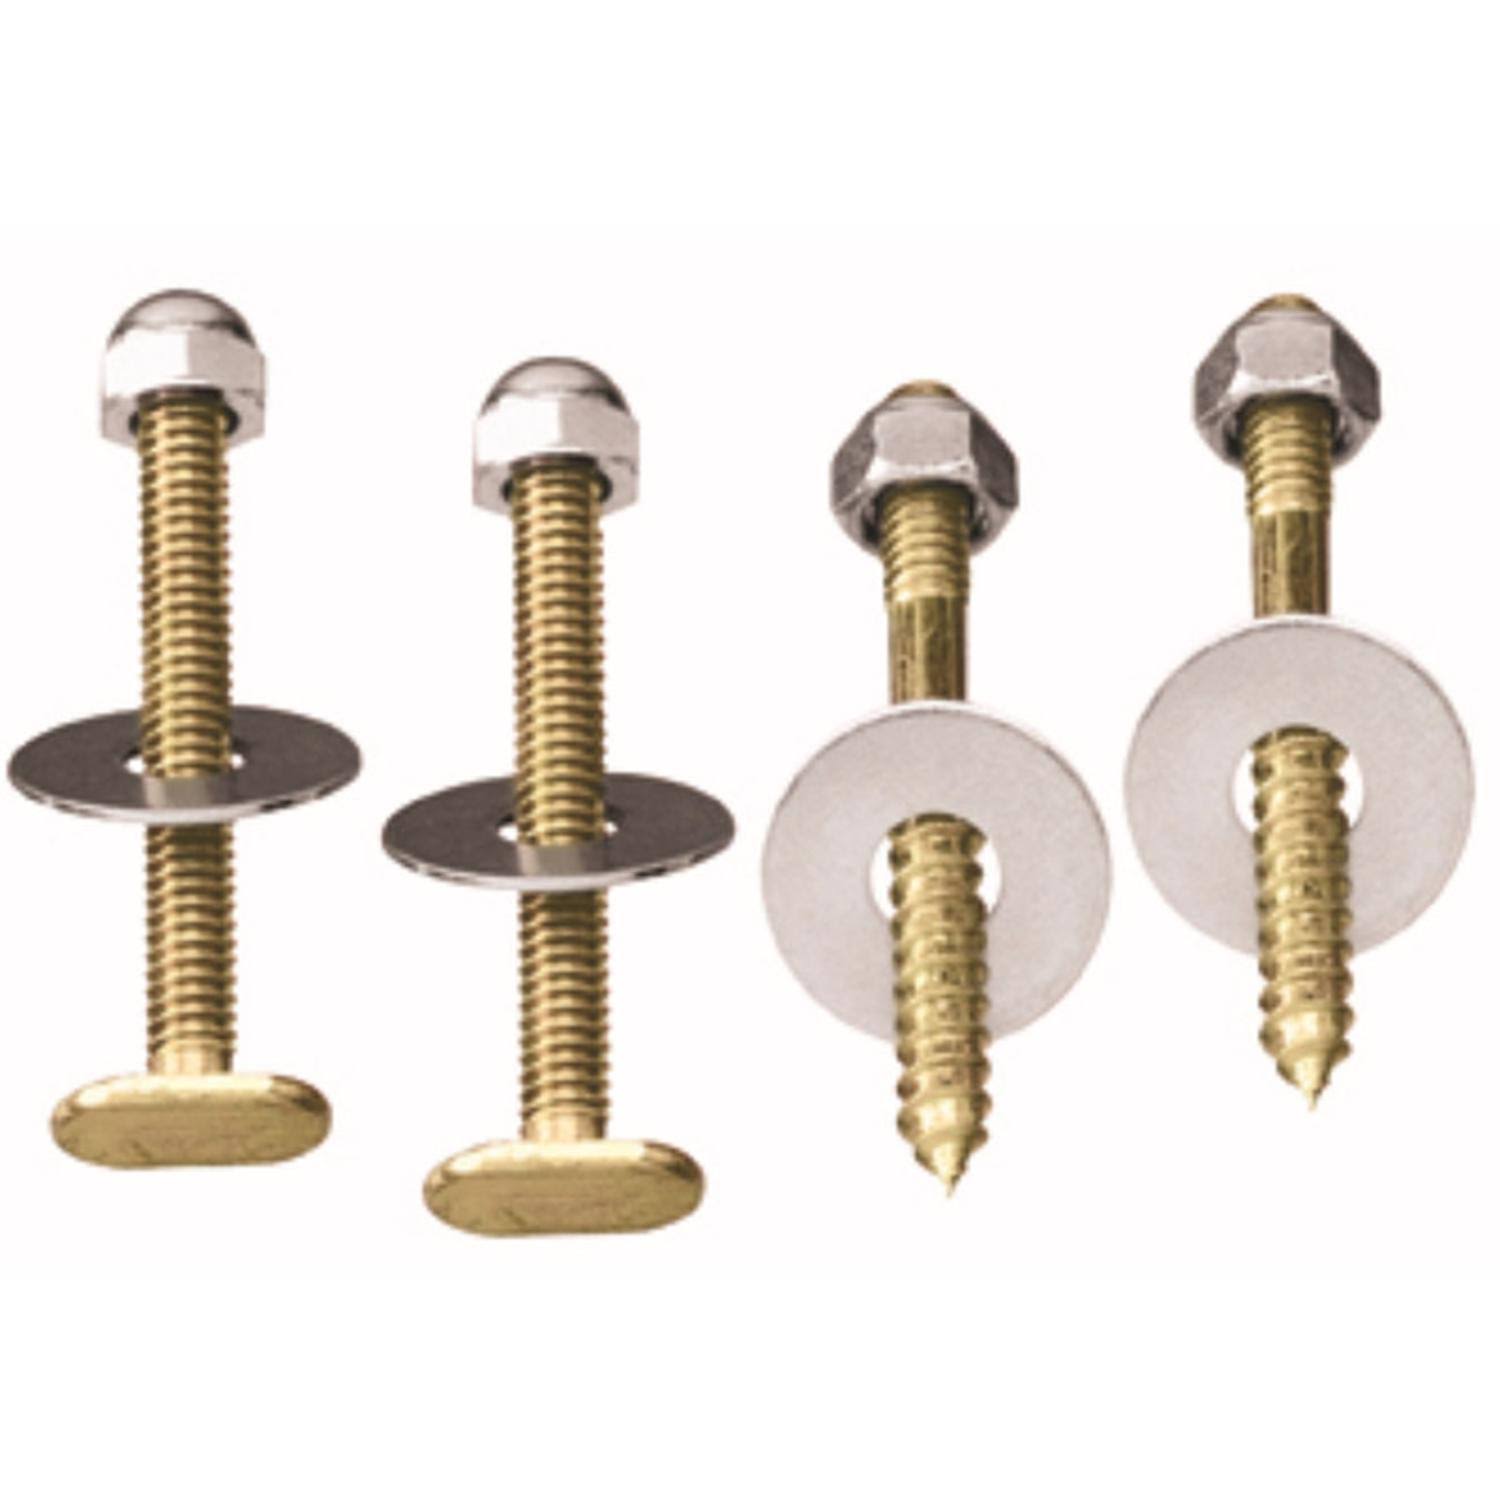 Plumb Pak Toilet Bolts and Screws - Chrome Plated